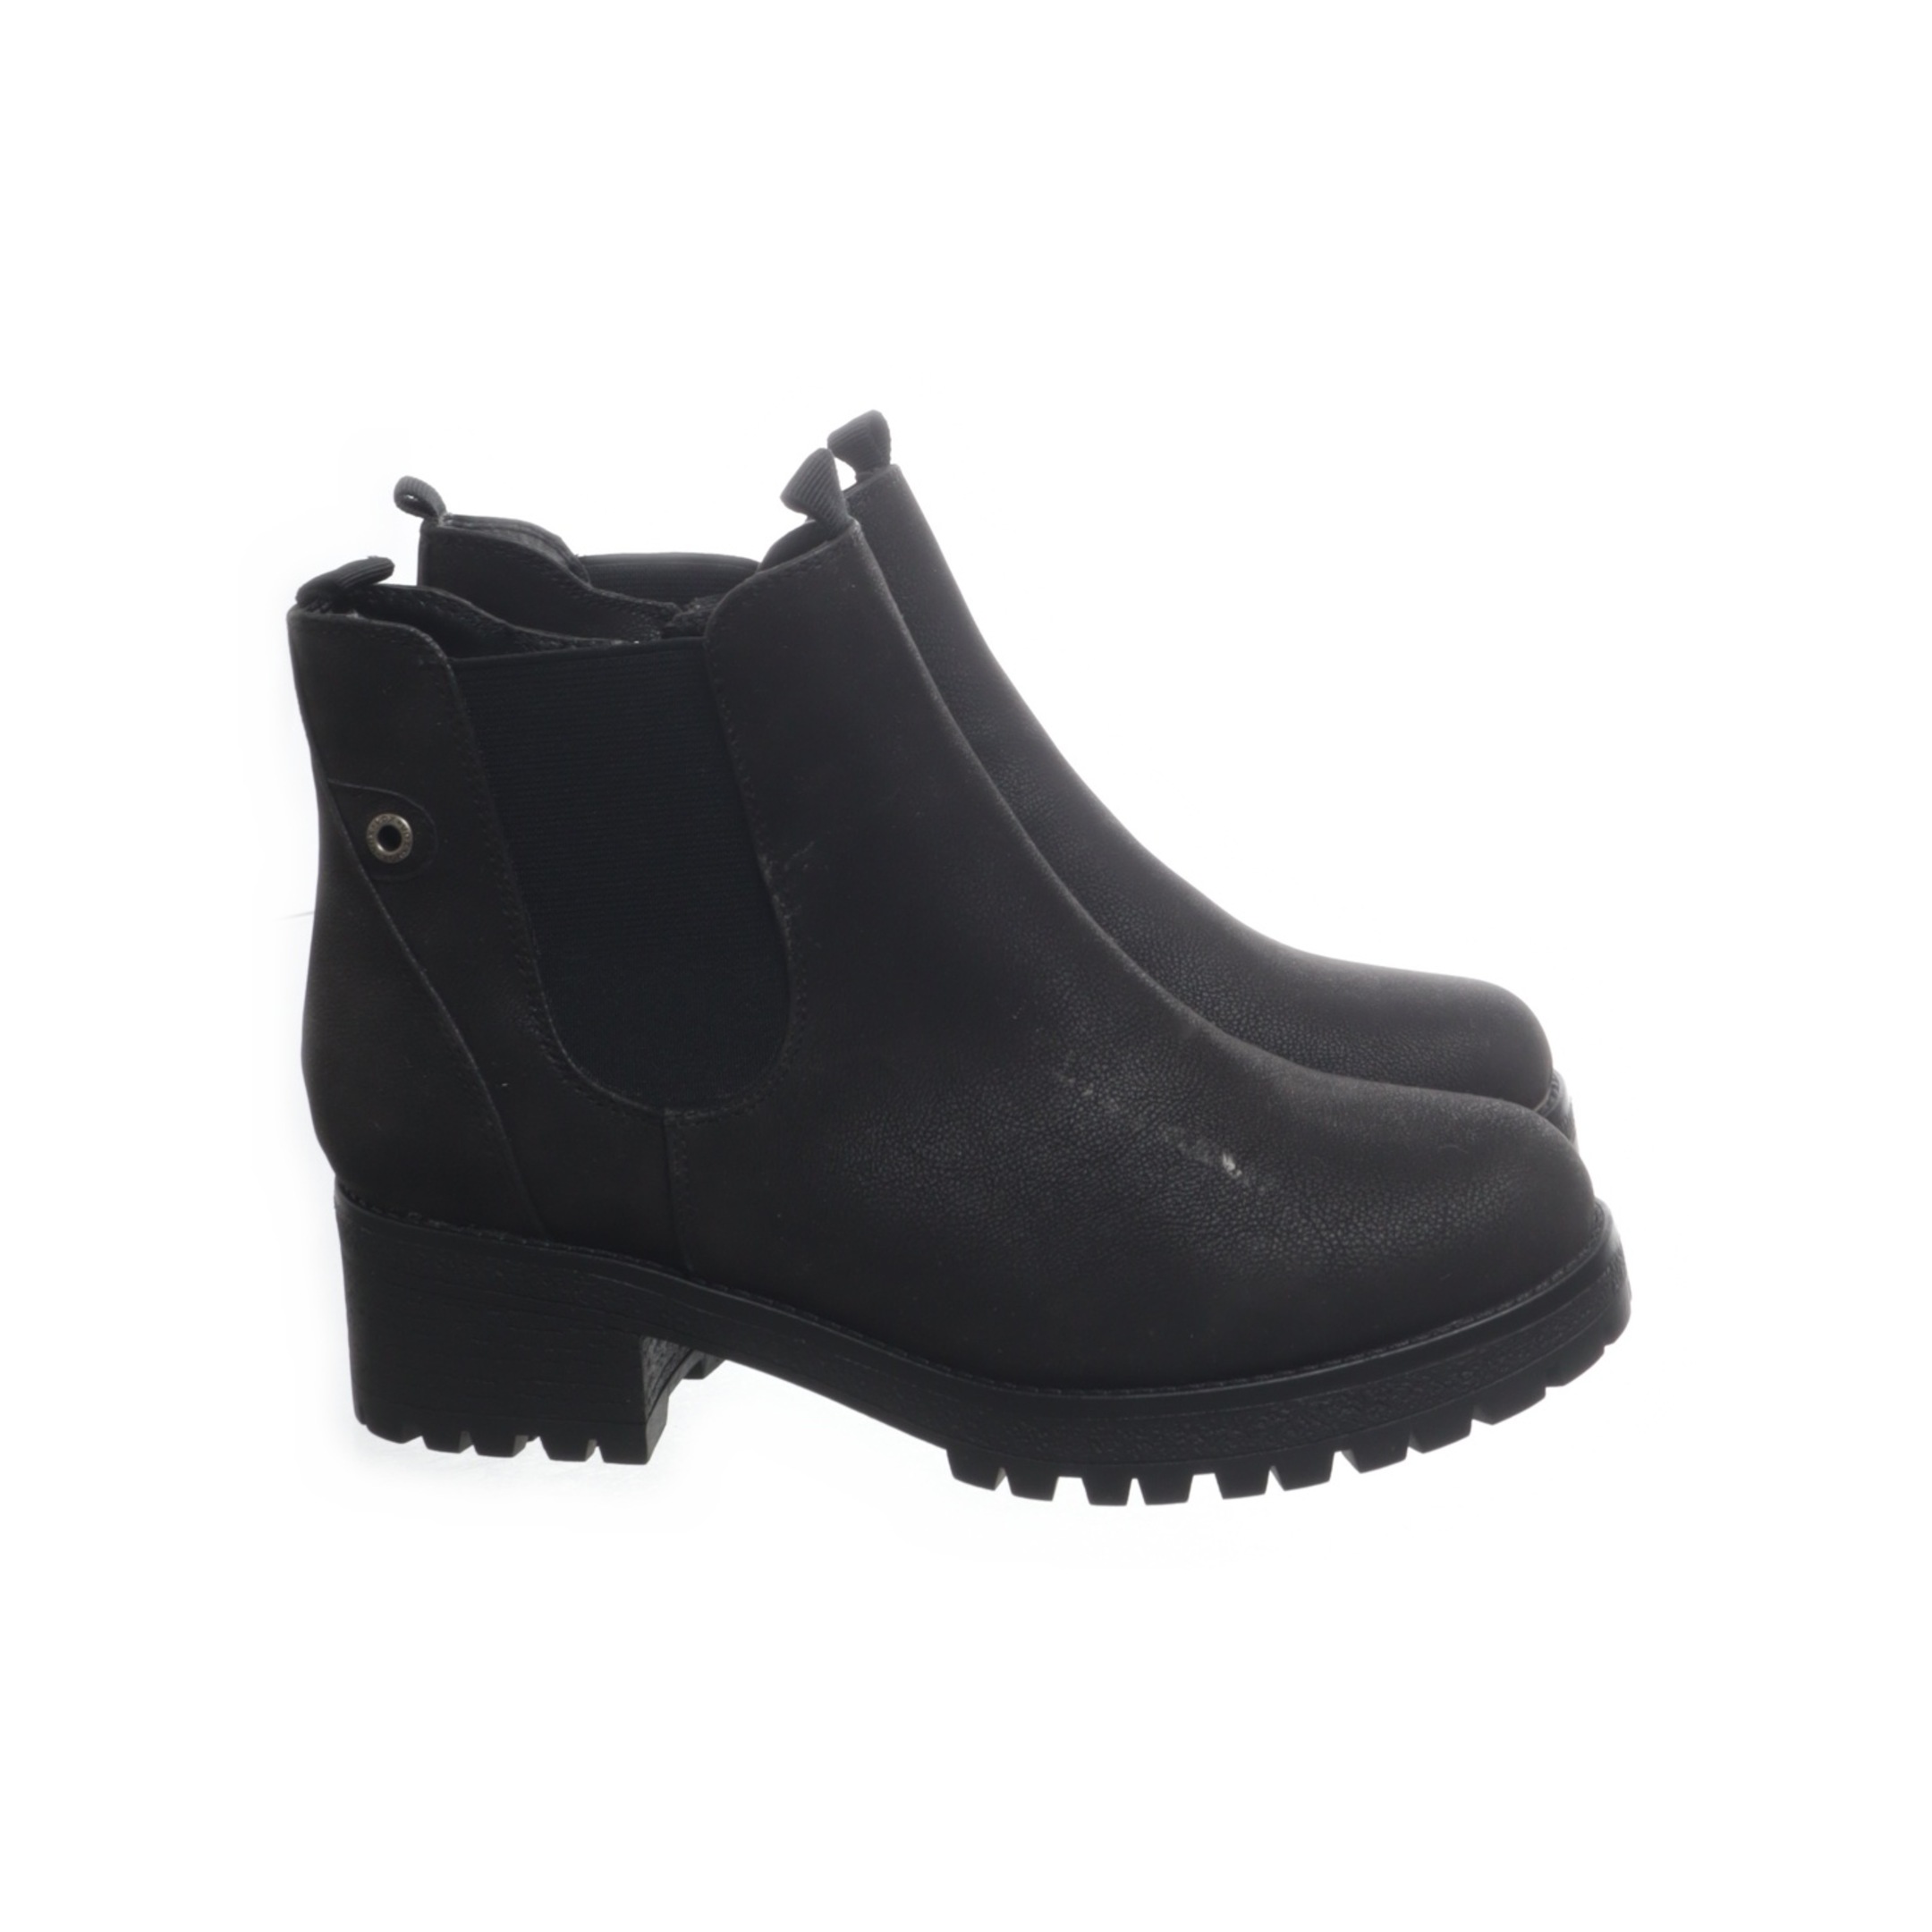 Vox Chelsea boots